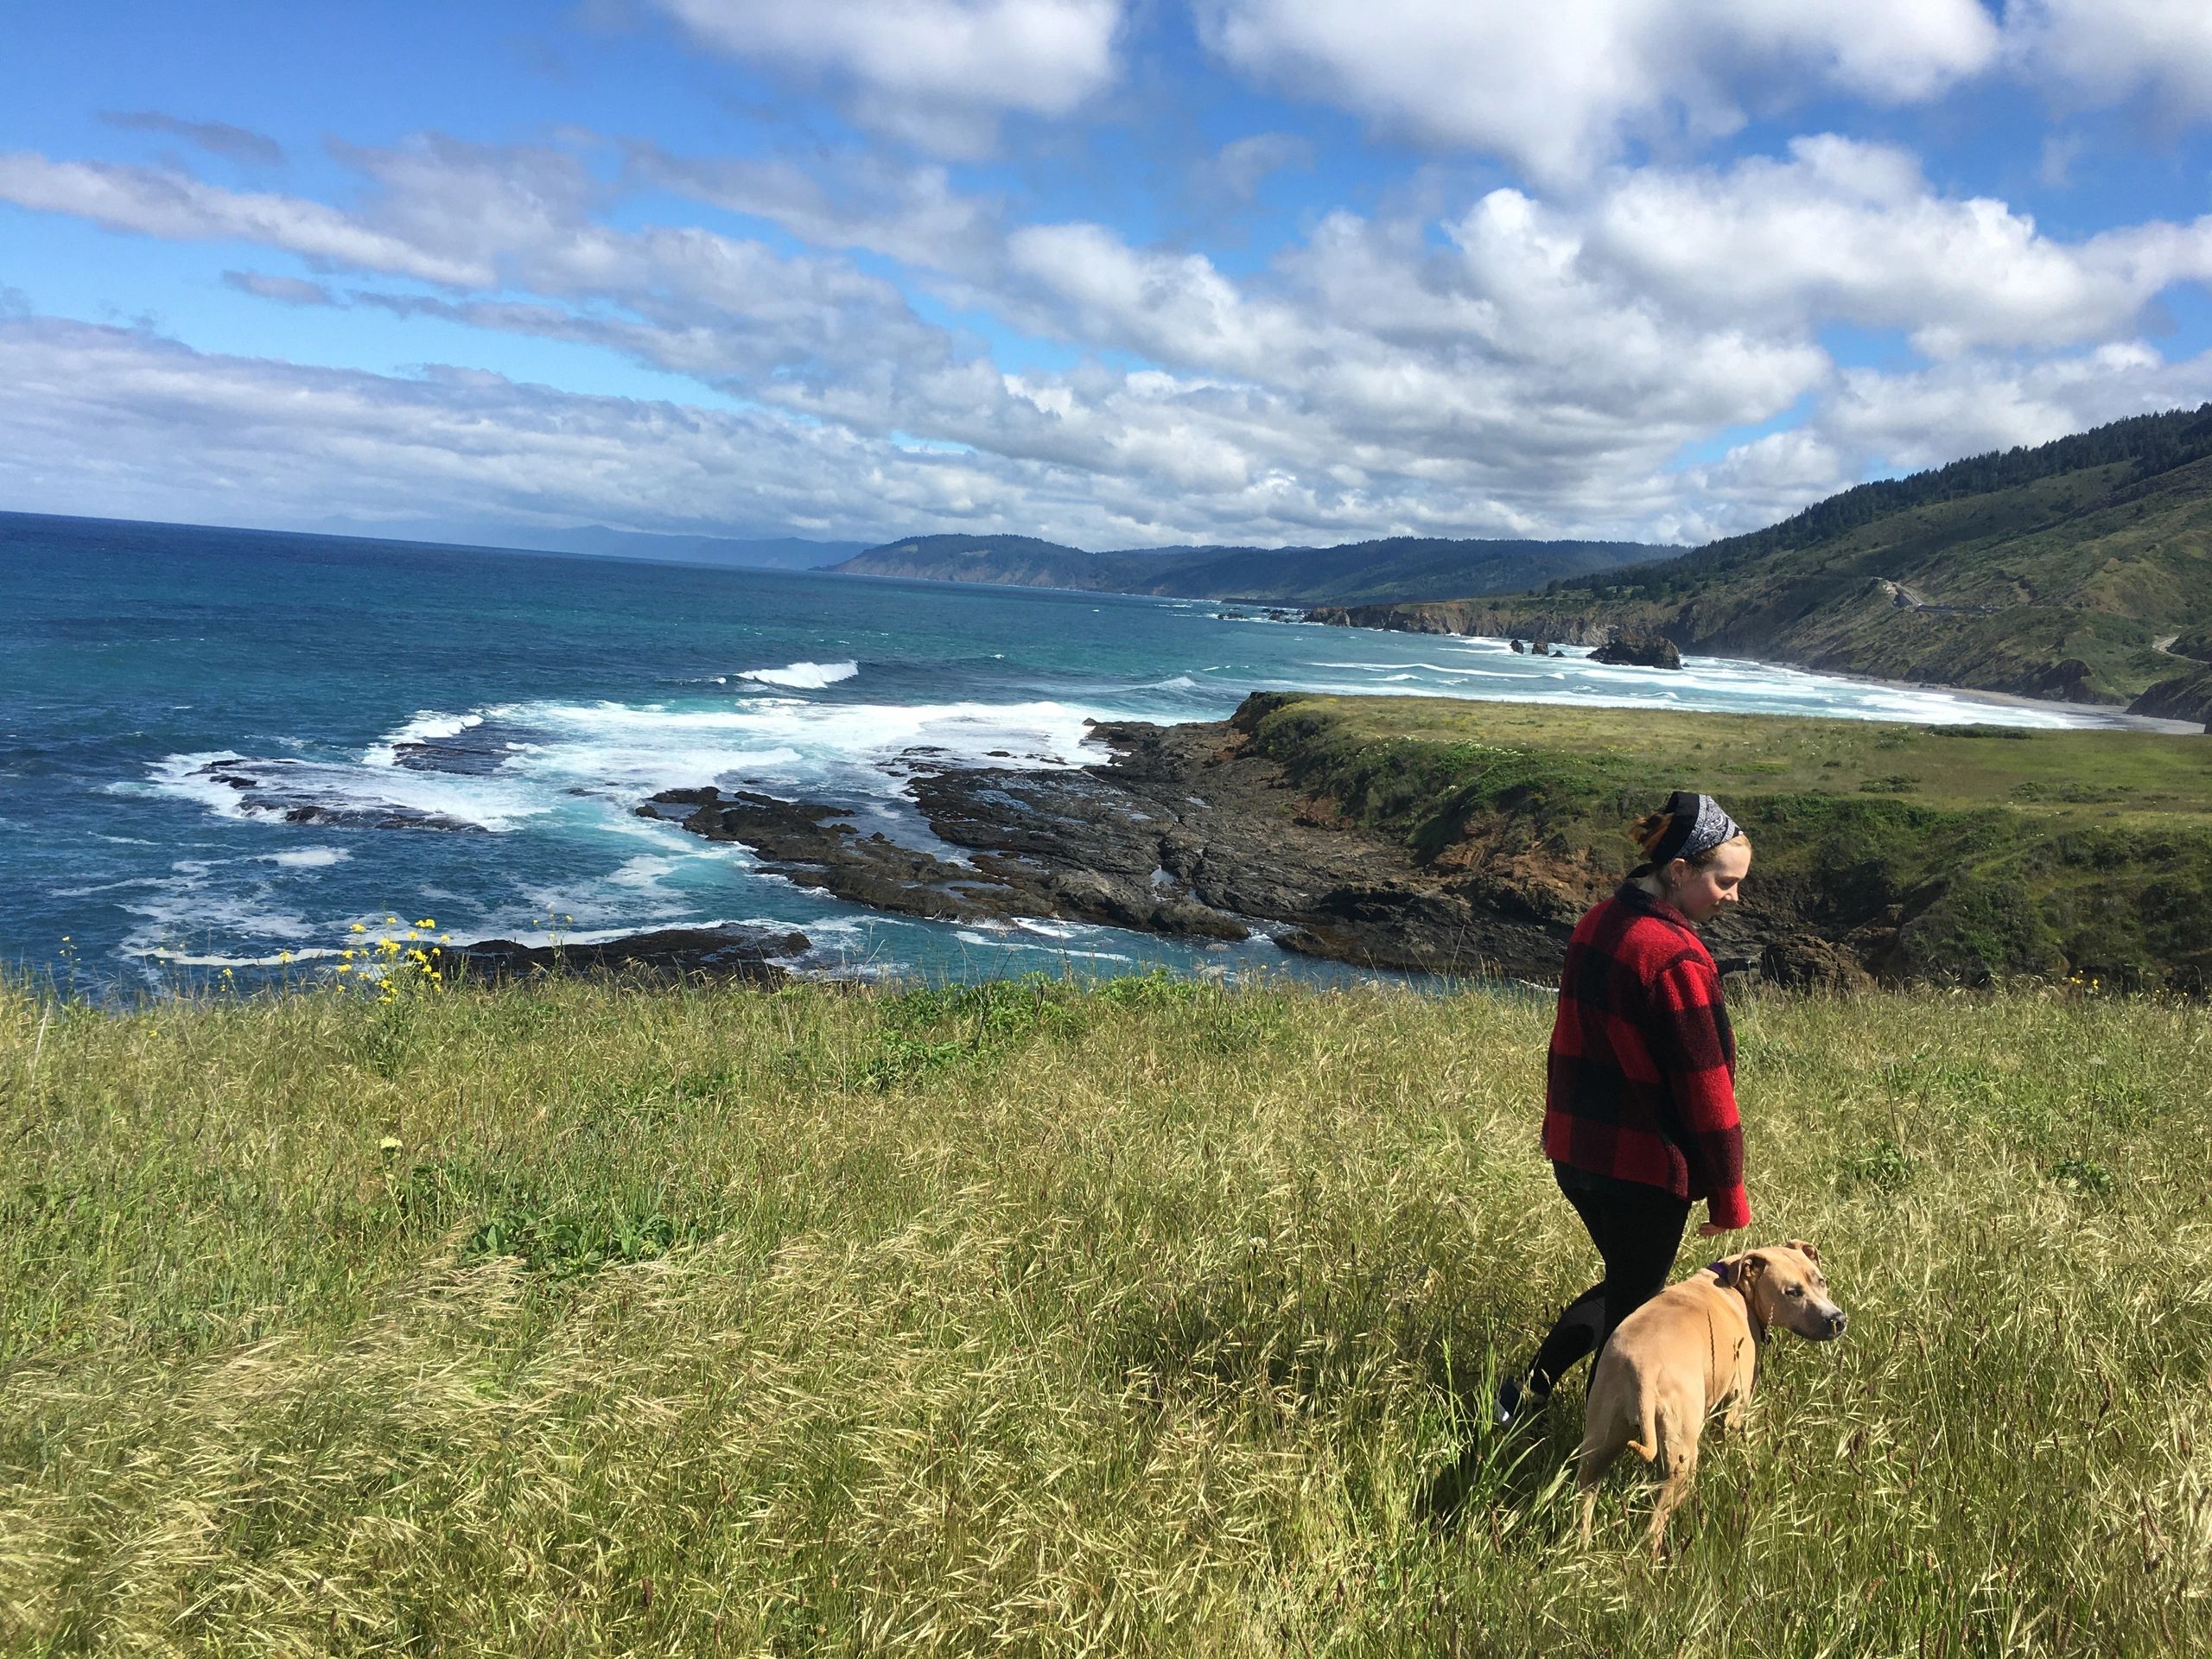 Hiking  along the Pacific ocean to a beautiful vista with your best friend.